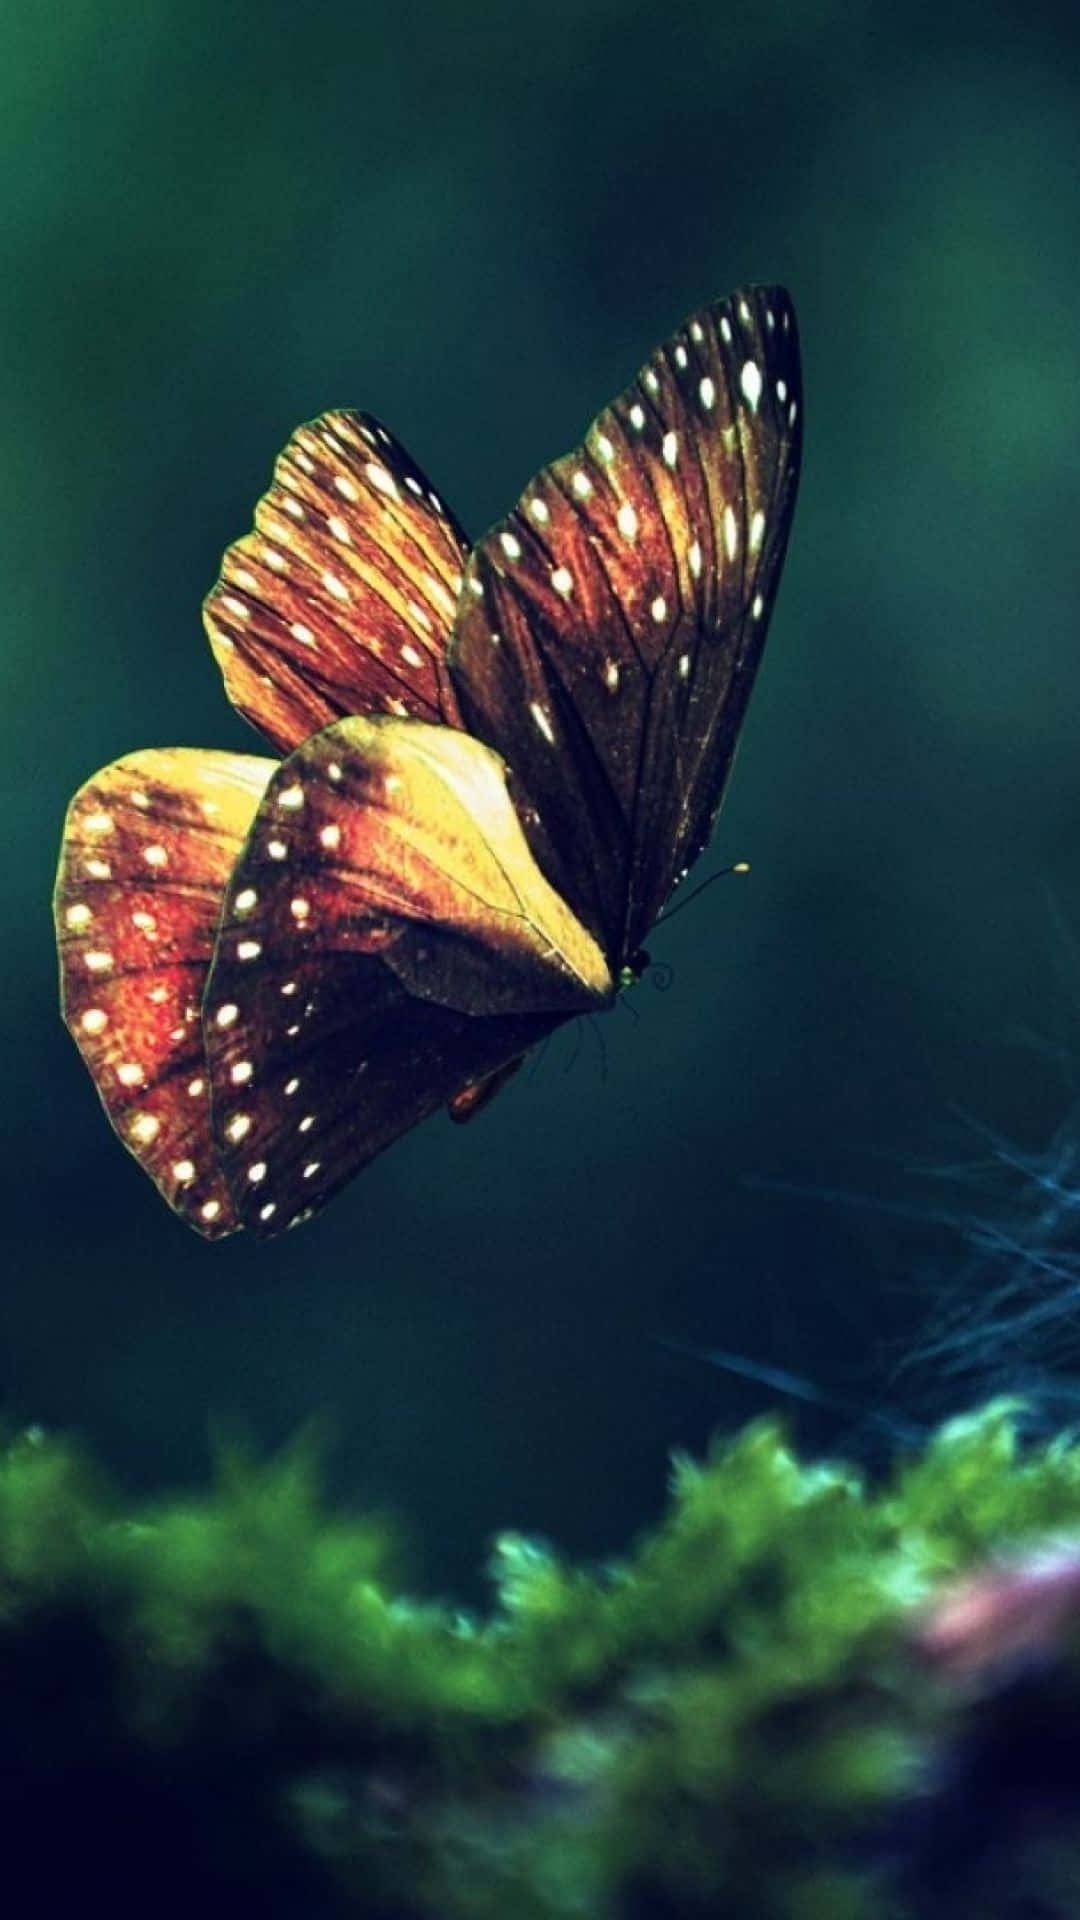 A butterfly spreads its beautiful wings surrounded by a serene floral background